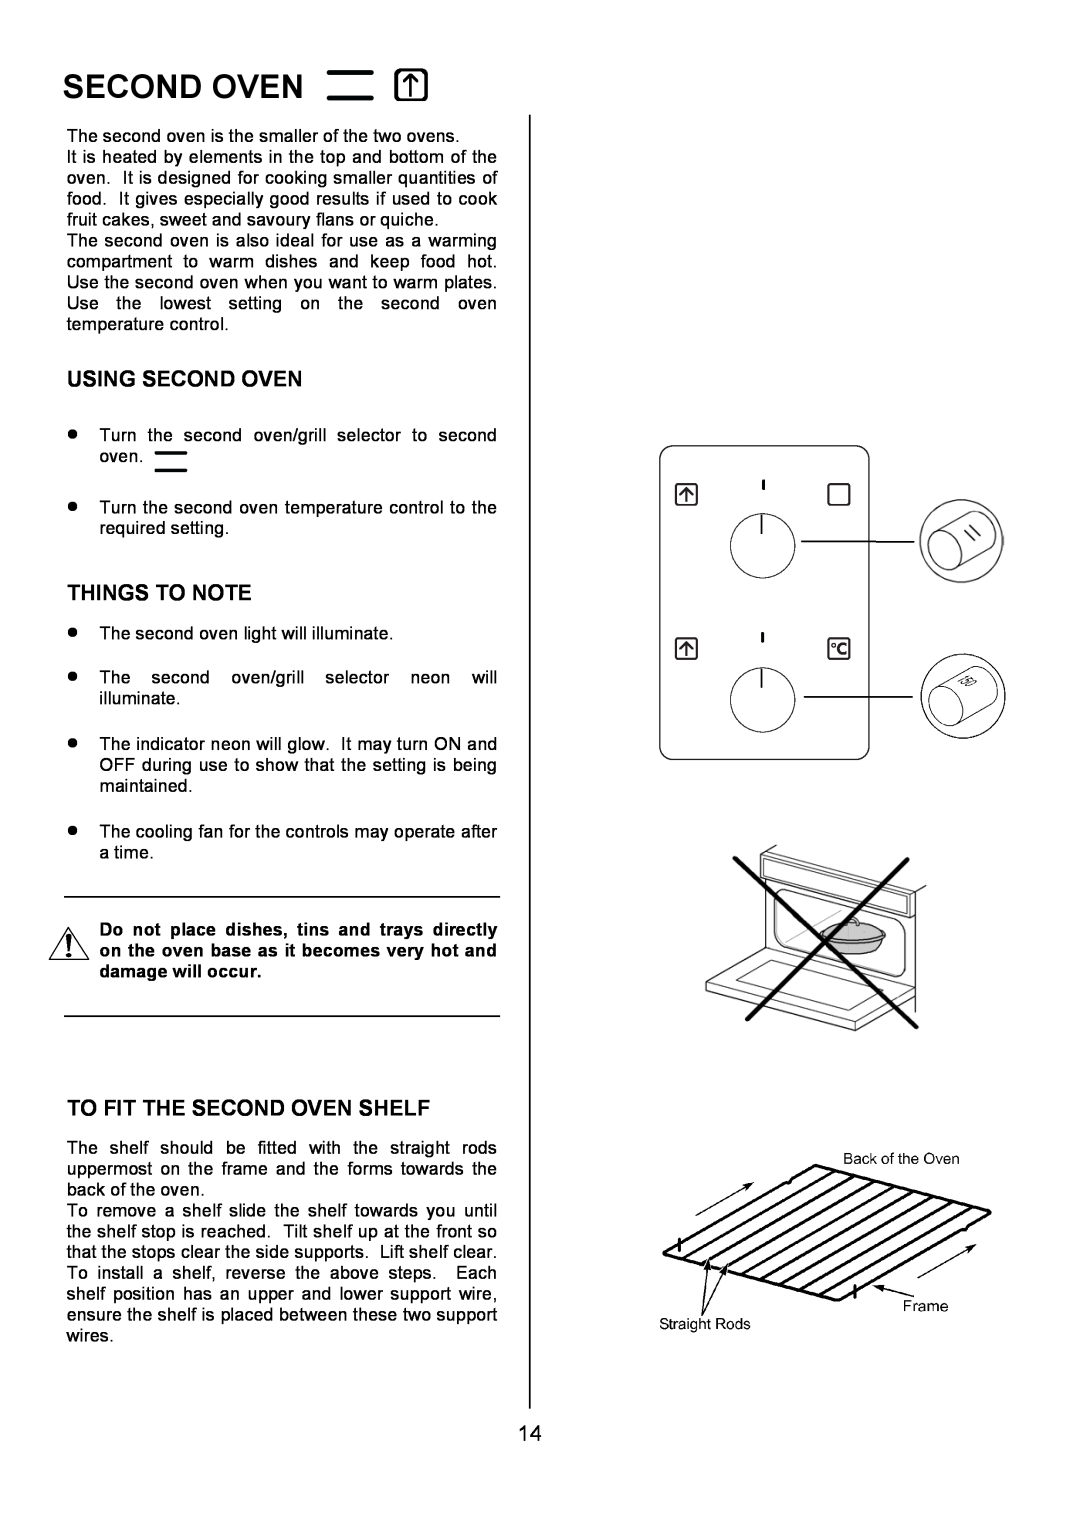 AEG U3100-4 manual Using Second Oven, To Fit The Second Oven Shelf, Things To Note 